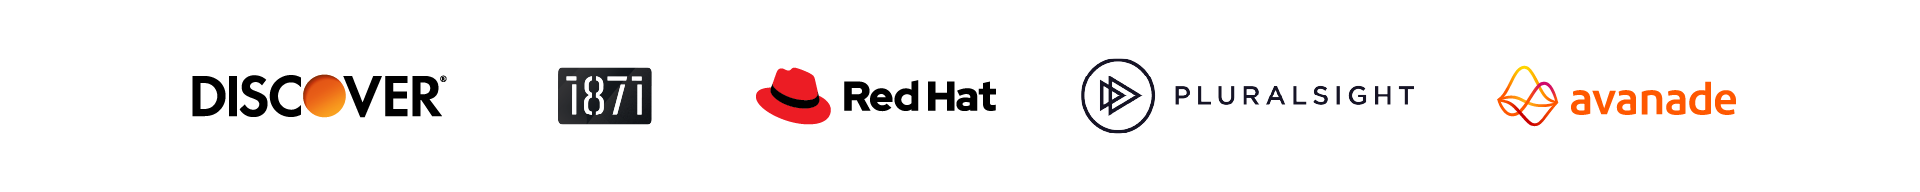 Logos of Discover, Red Hat, Pluralsight, and 1871